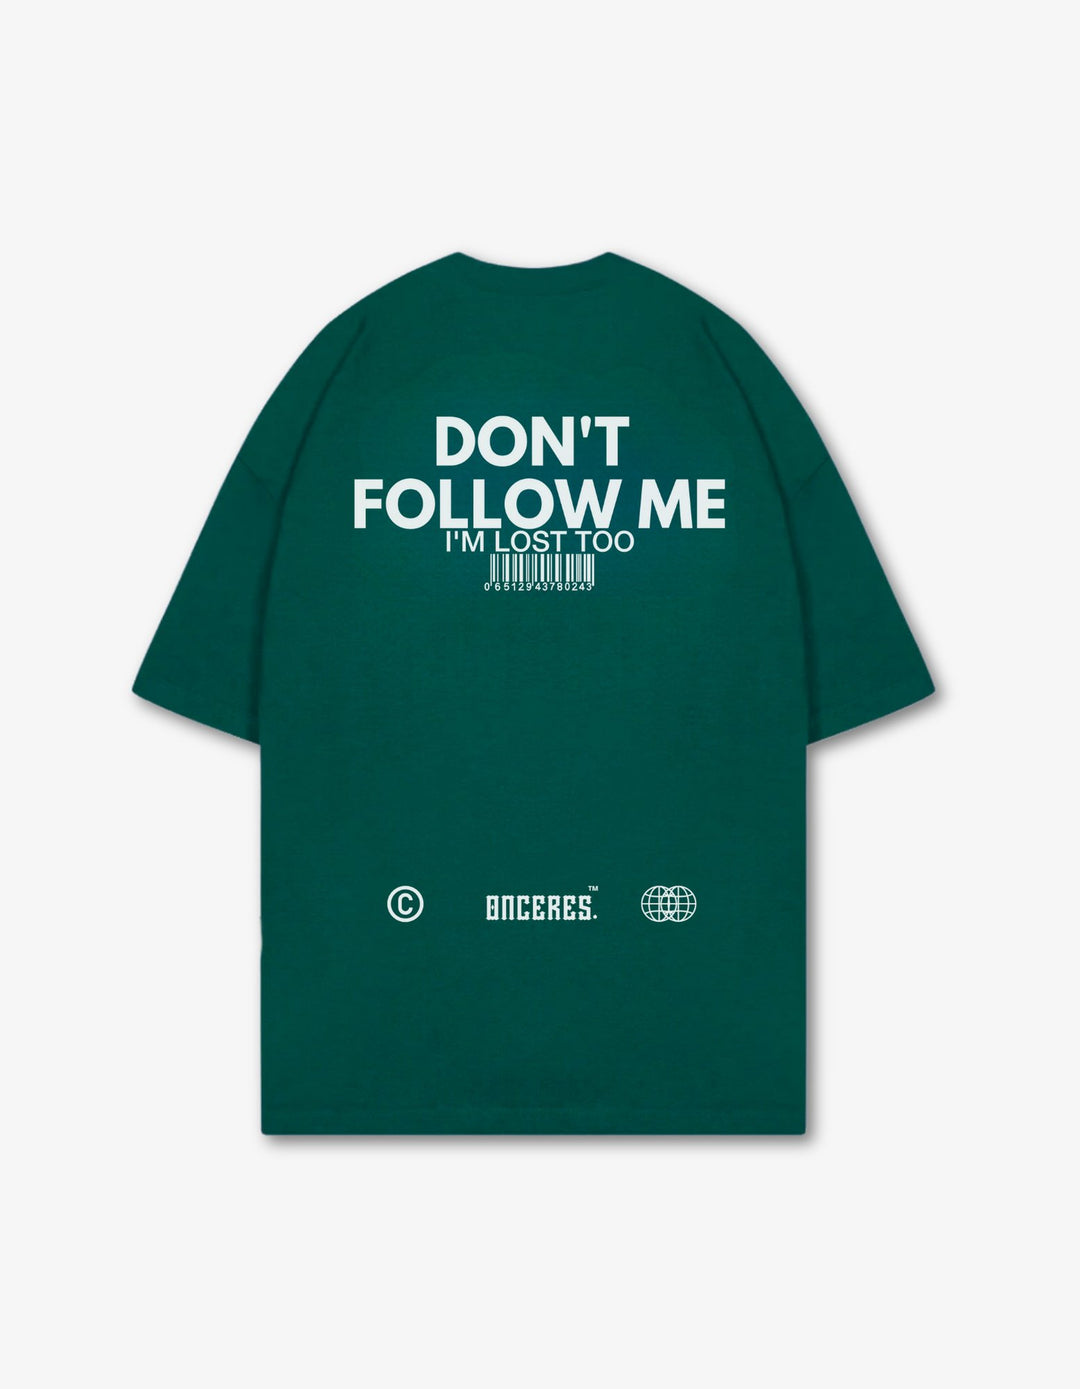 Don't Follow me - Bottle Green - Onceres™